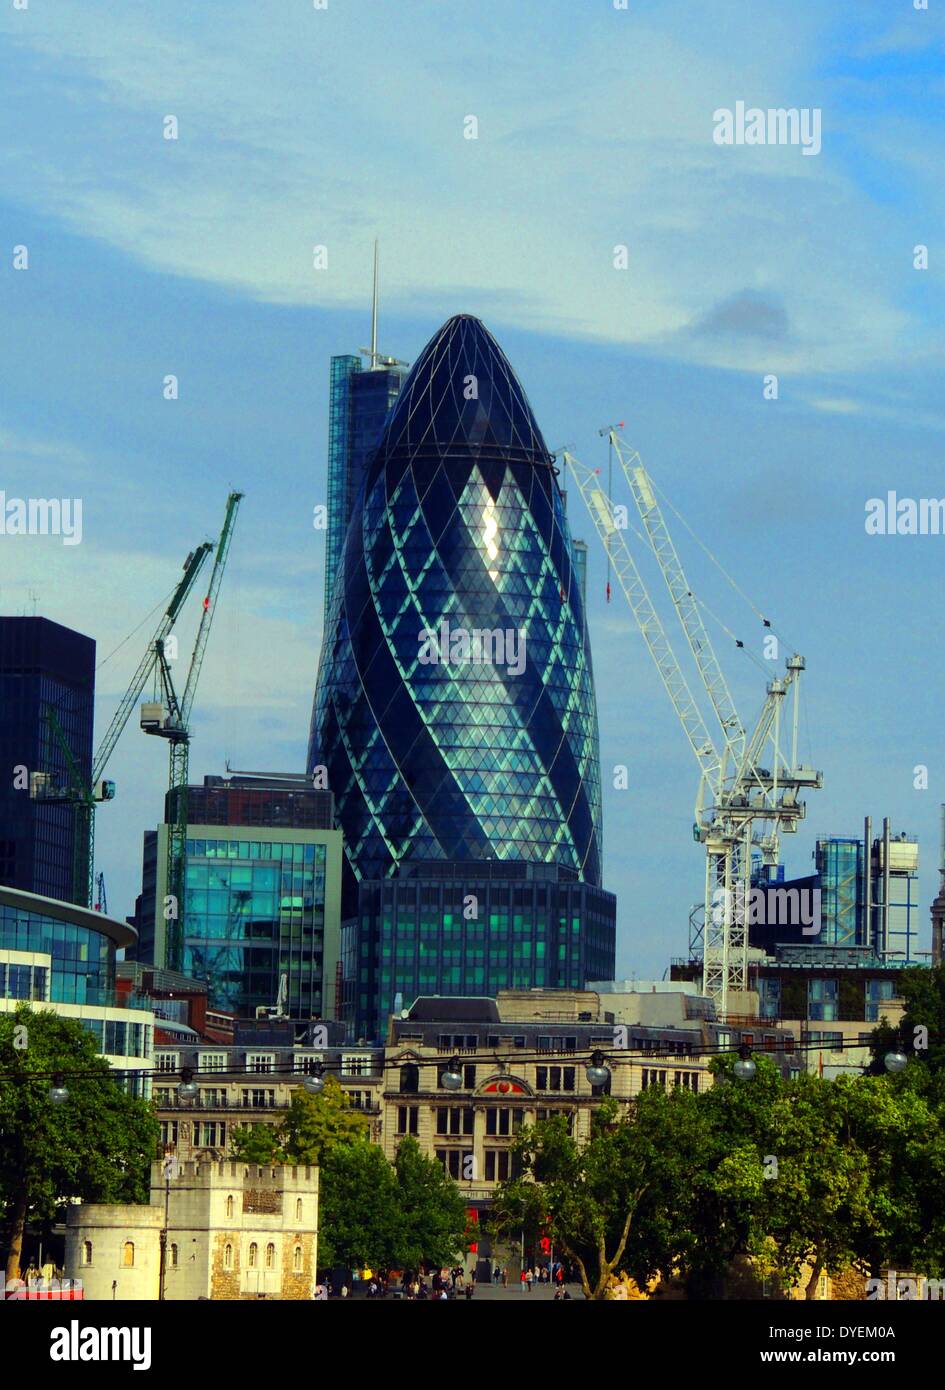 View of St Mary Axe (also known as the Gherkin) 2013. Designed by Norman Foster and Arup Engineers. Completed in 2003. Stock Photo